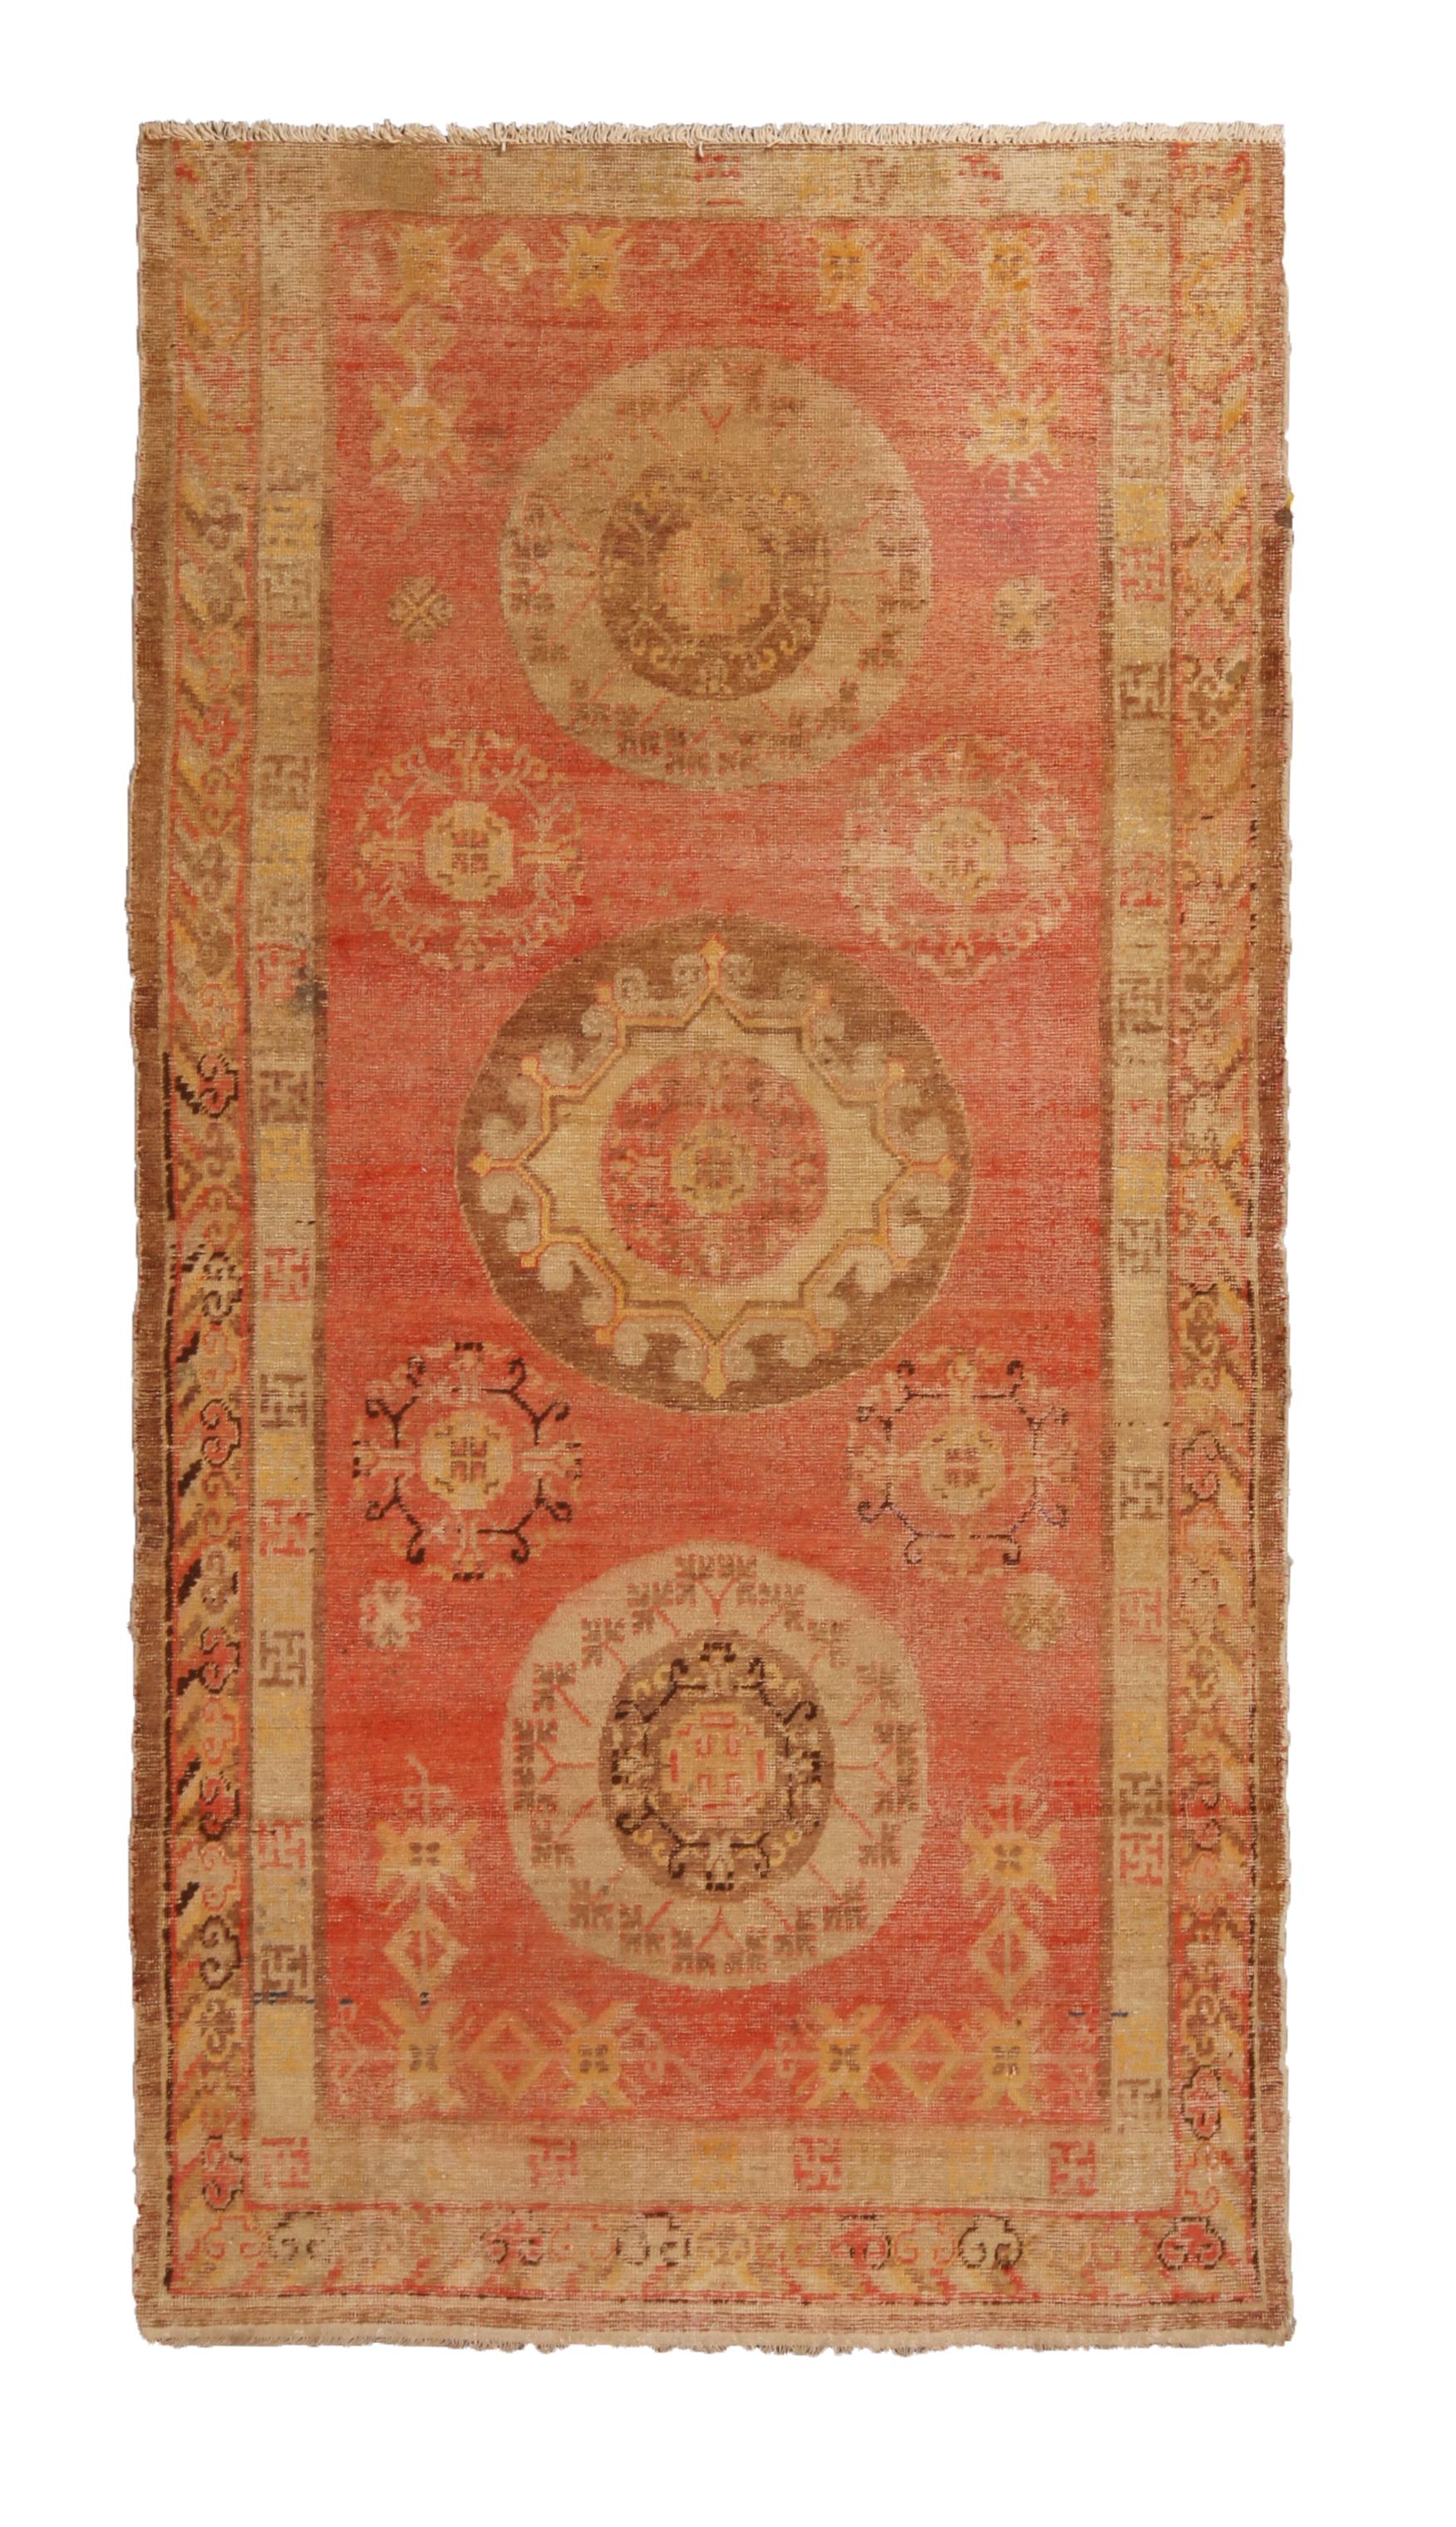 Hand knotted in high-quality wool from East Turkestan between 1910-1920, this antique Khotan rug hosts a rich variation of ornate symbols and borders, including a mirrored medallion field design enfolded with cloud band and peace symbol borders.